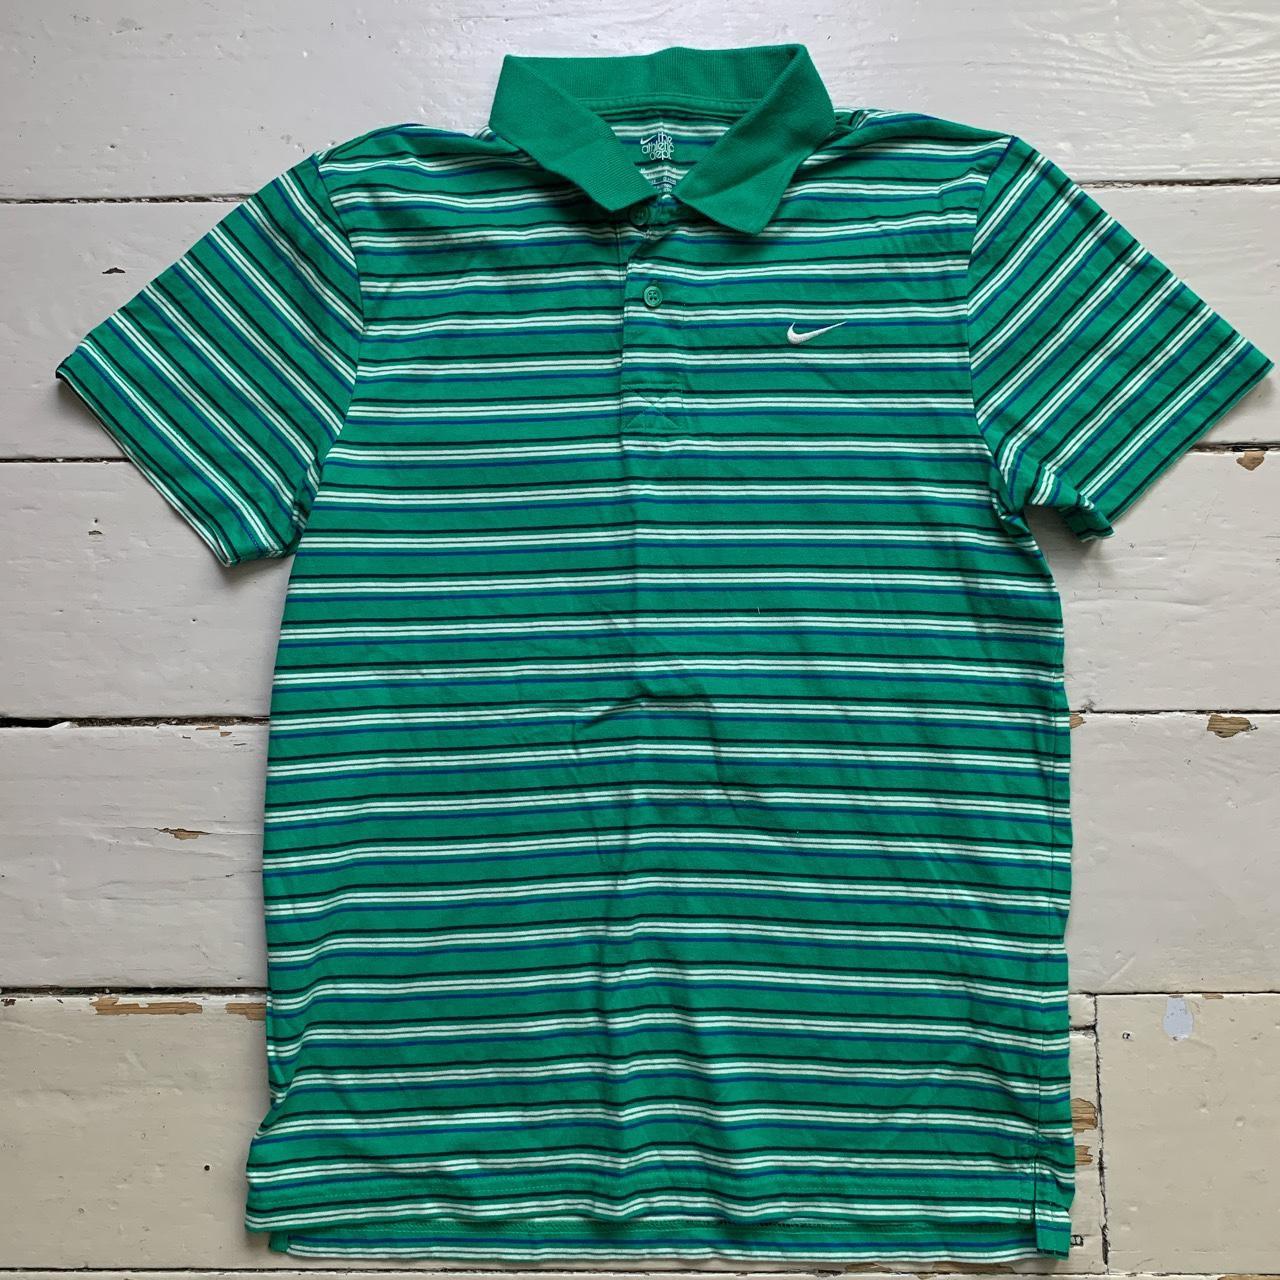 Nike Athletic Department Vintage Swoosh Striped Polo Shirt